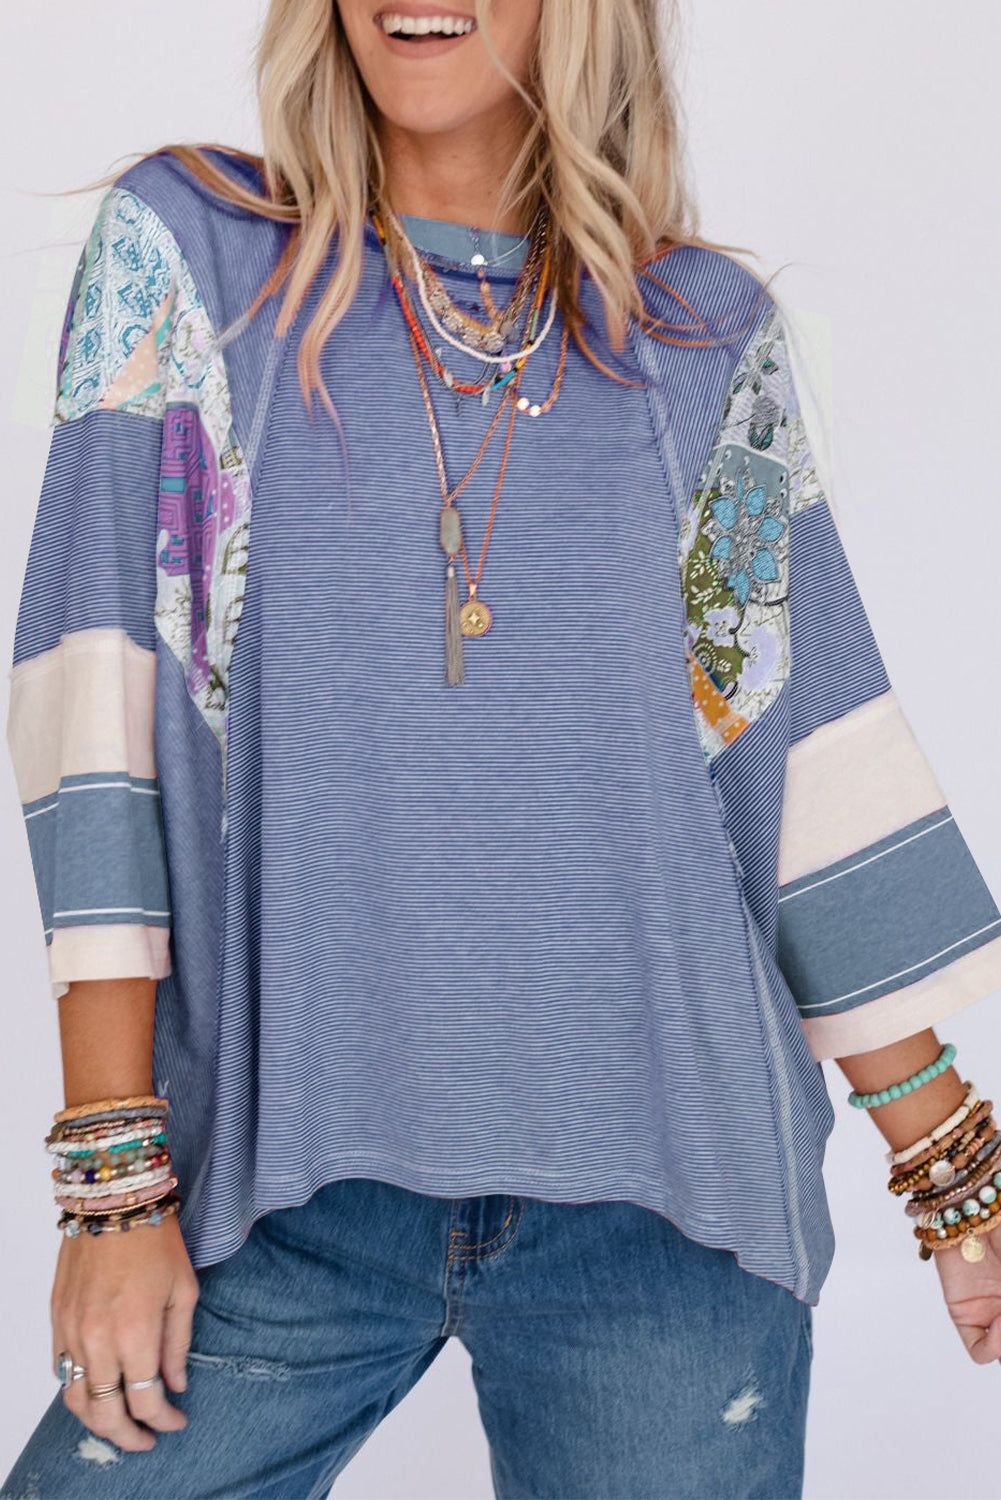 Sky blue printed pinstriped color block patchwork oversized top - l / 95% polyester + 5% elastane - long sleeve tops